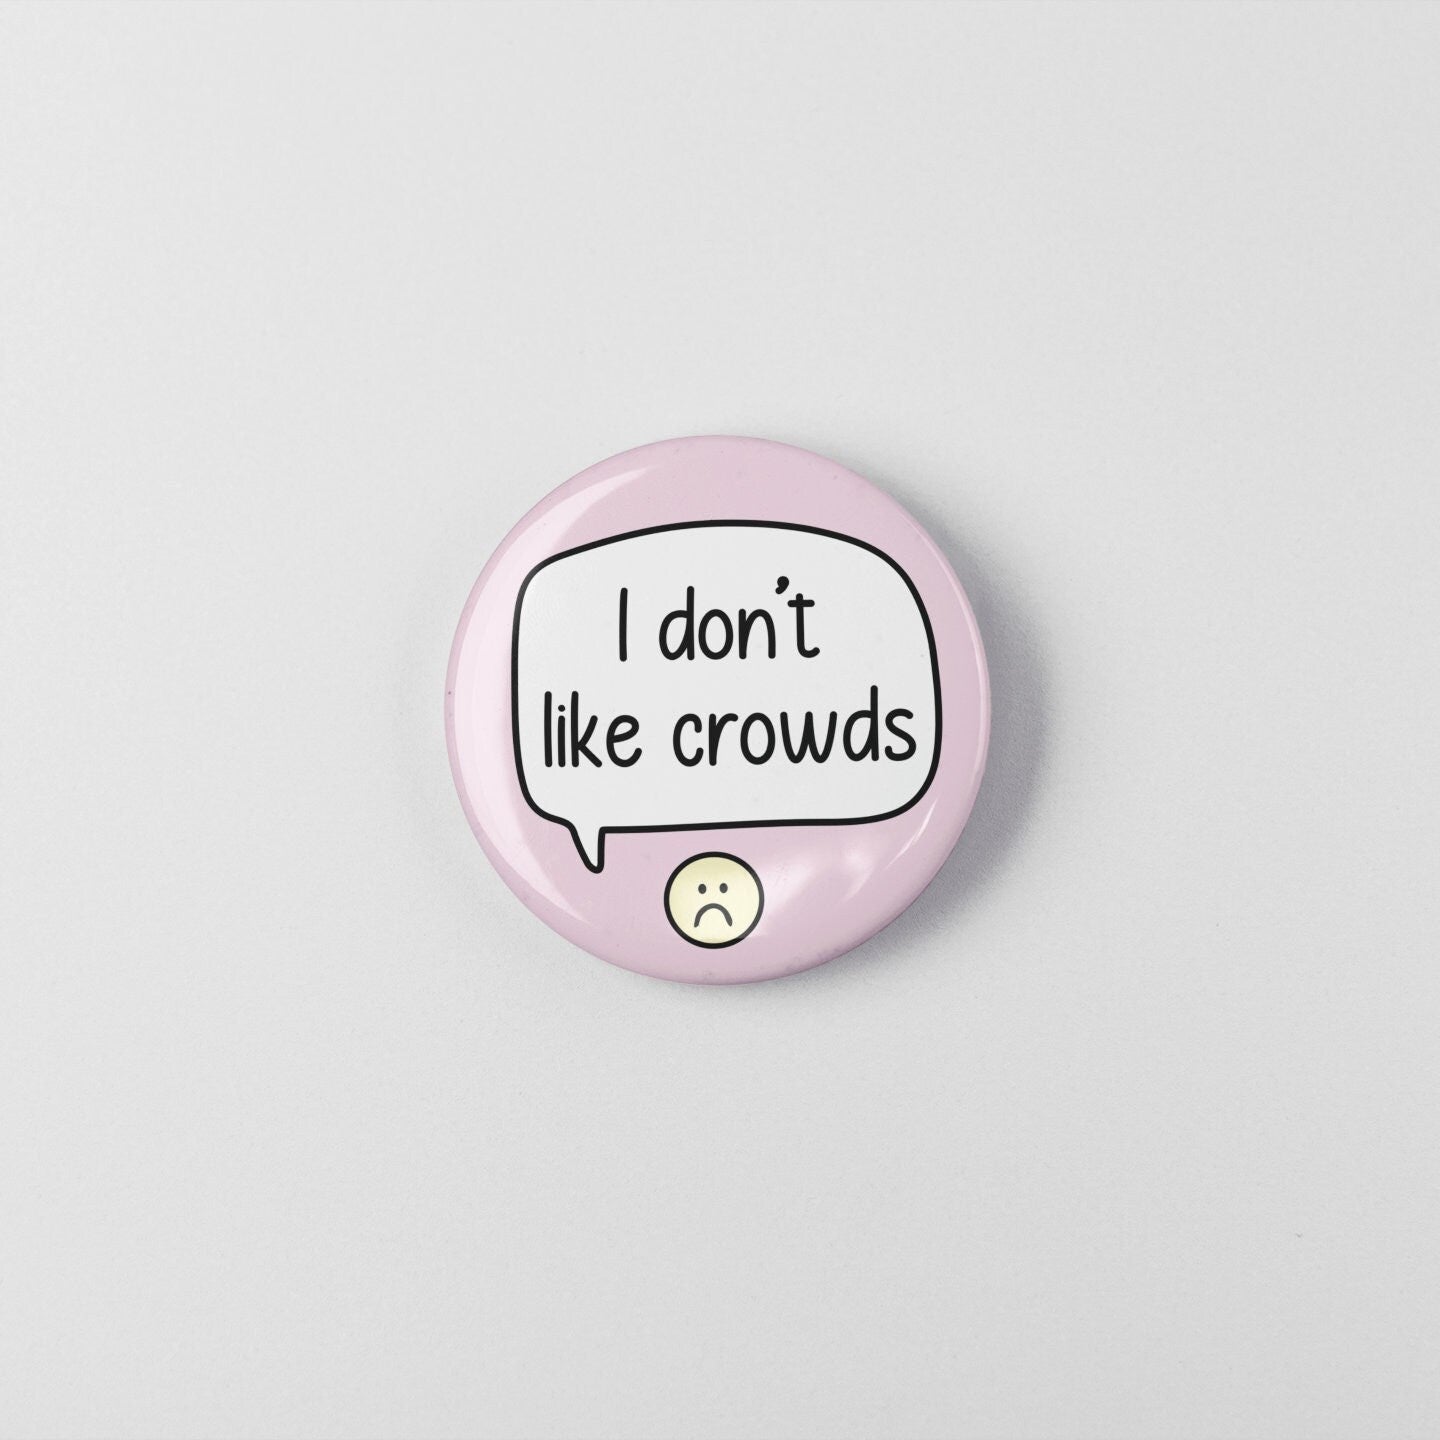 I Don't Like Crowds Badge Pin | Social Anxiety - easily overwhelmed